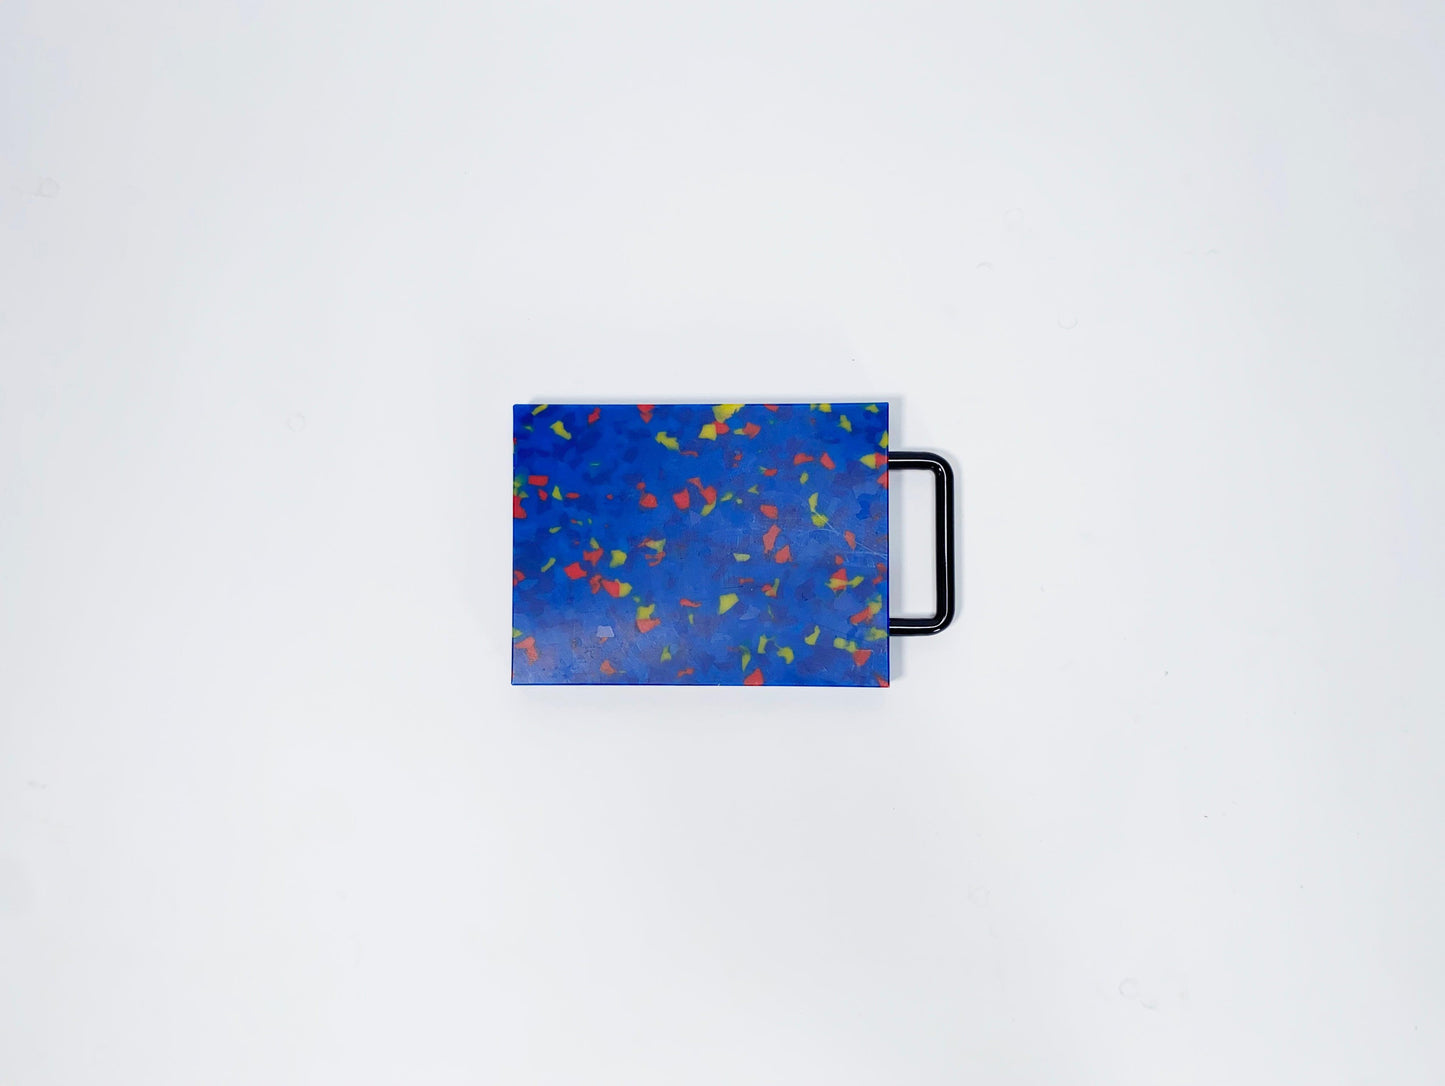 Small blue cutting board with yellow and red confetti and black handle 